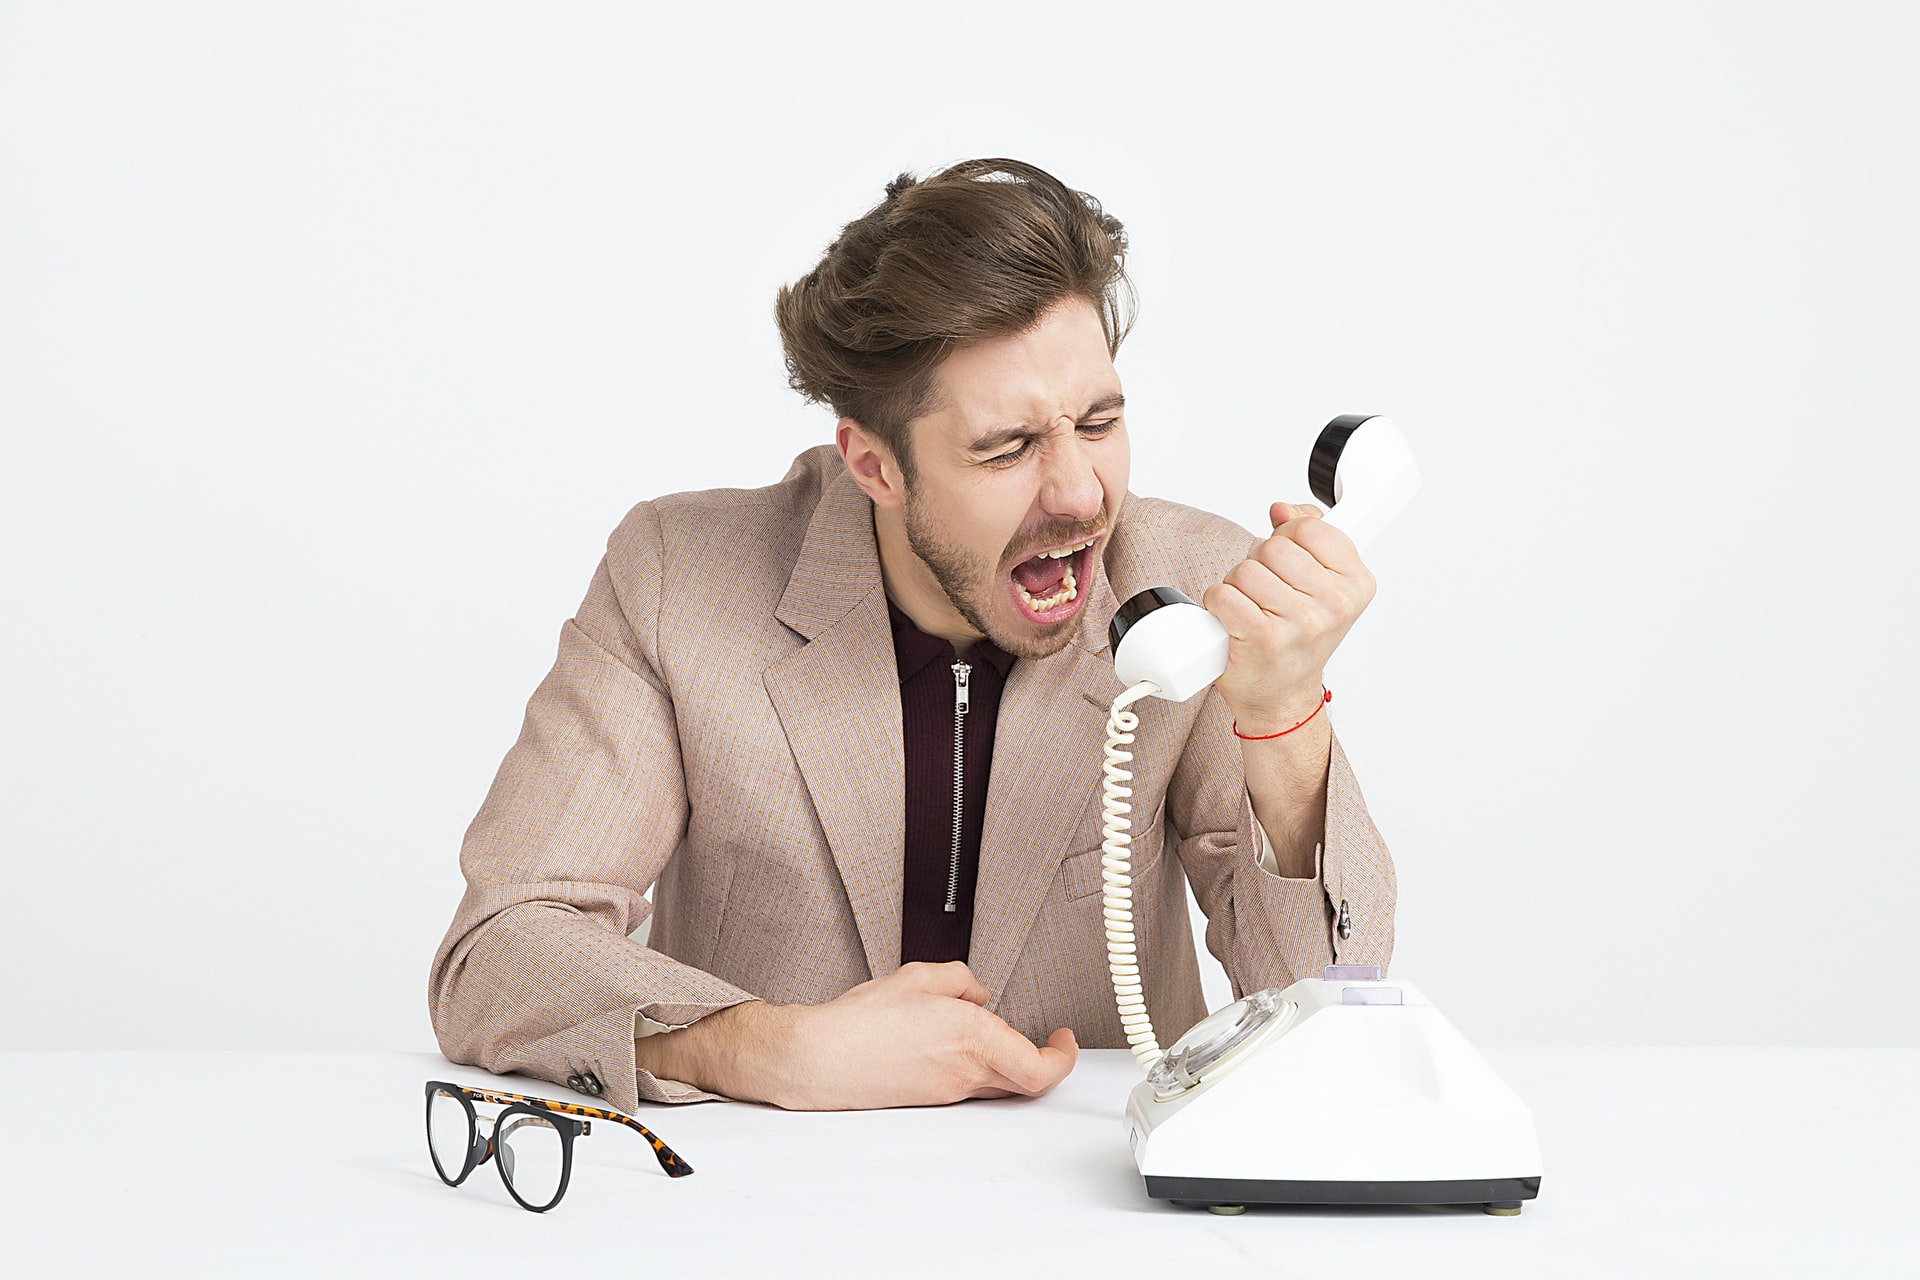 frustrated man yelling at a phone 